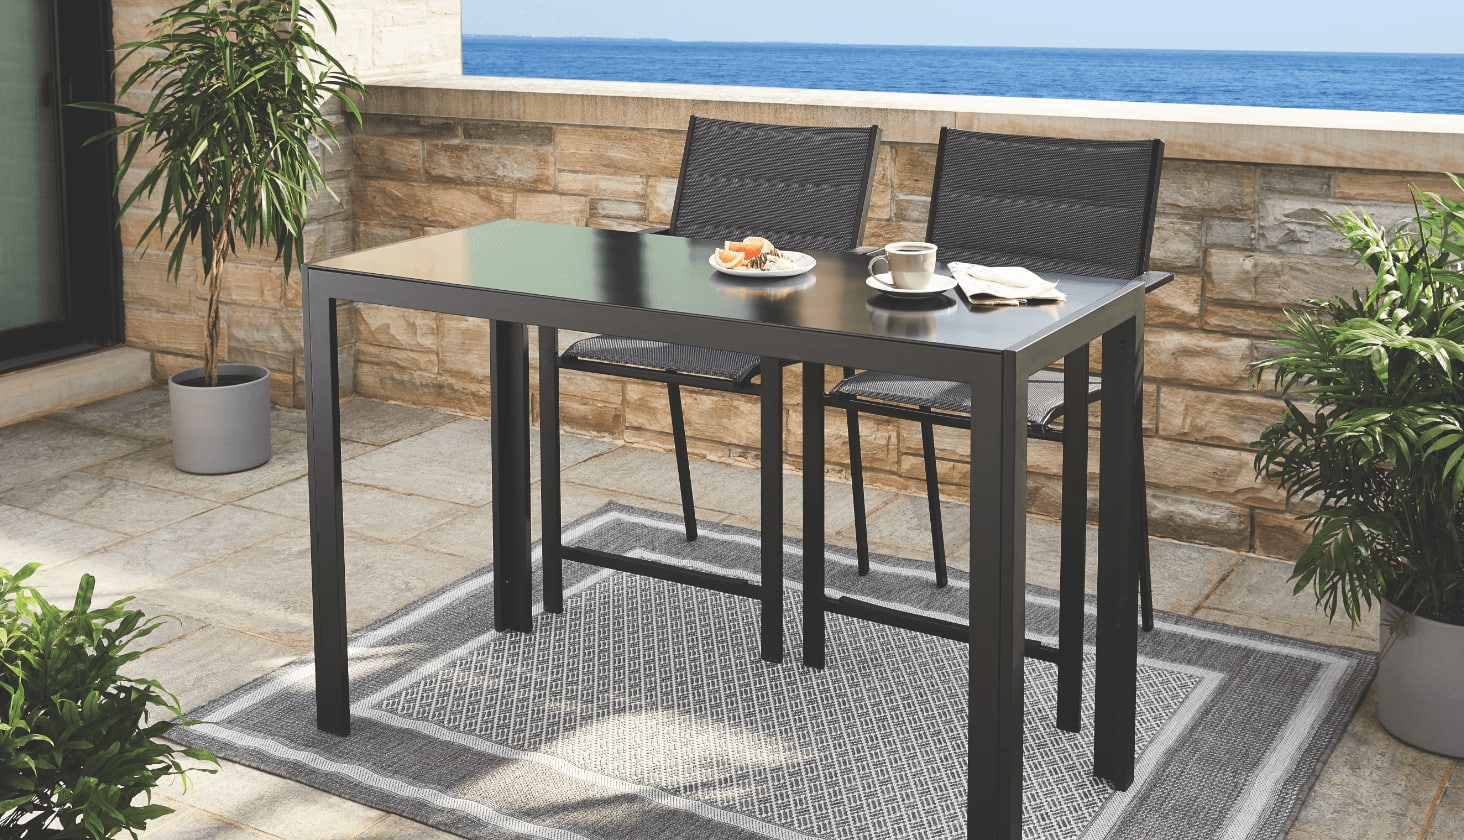 Premium Dock Furniture & Chairs: Elevate Your Waterfront